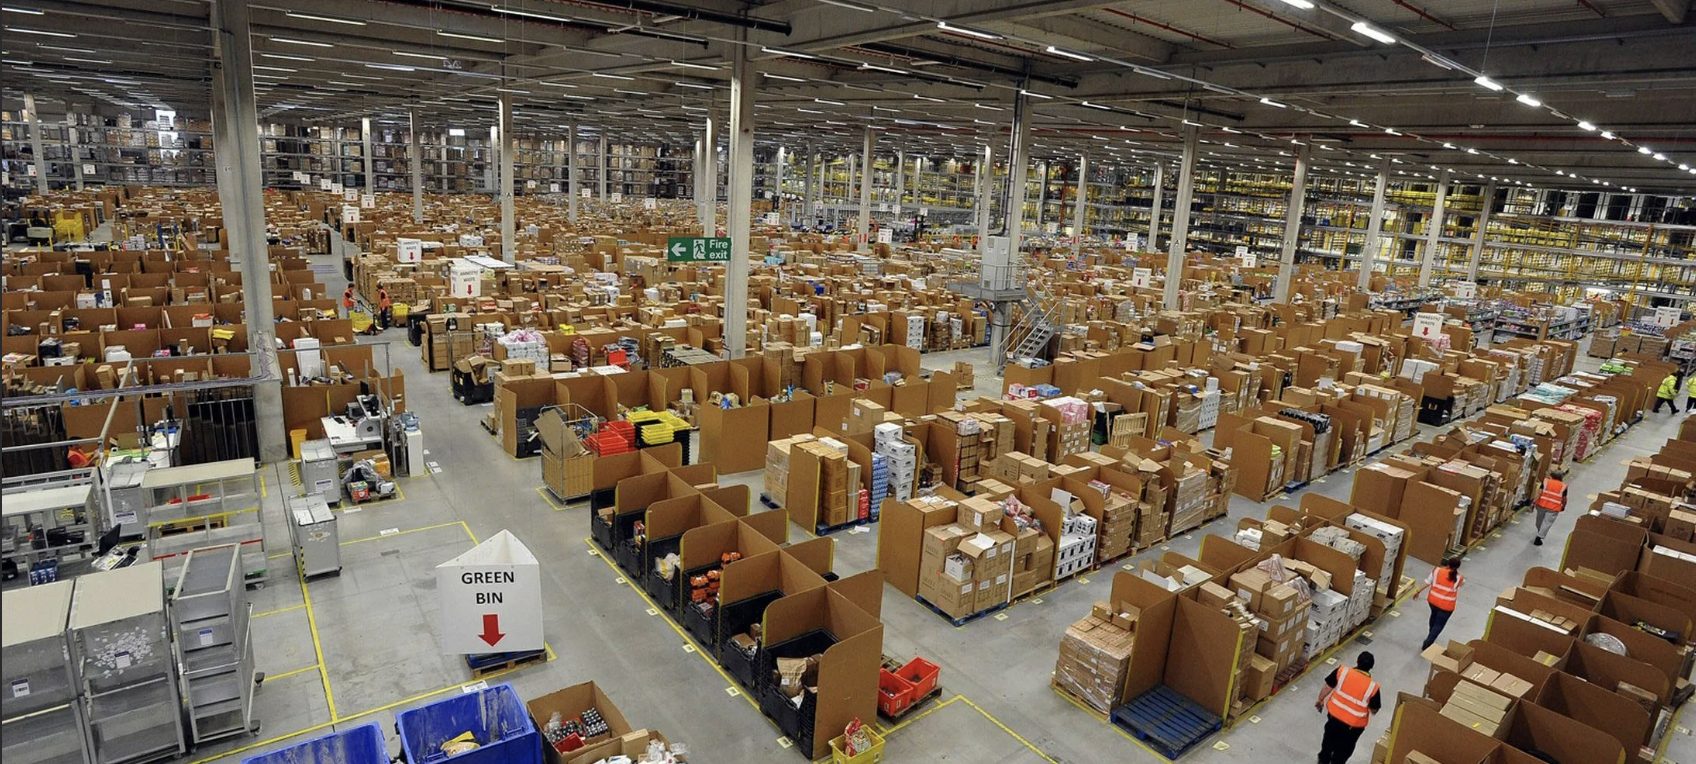 How To Find Amazon Warehouse and Fulfillment Centers Near You